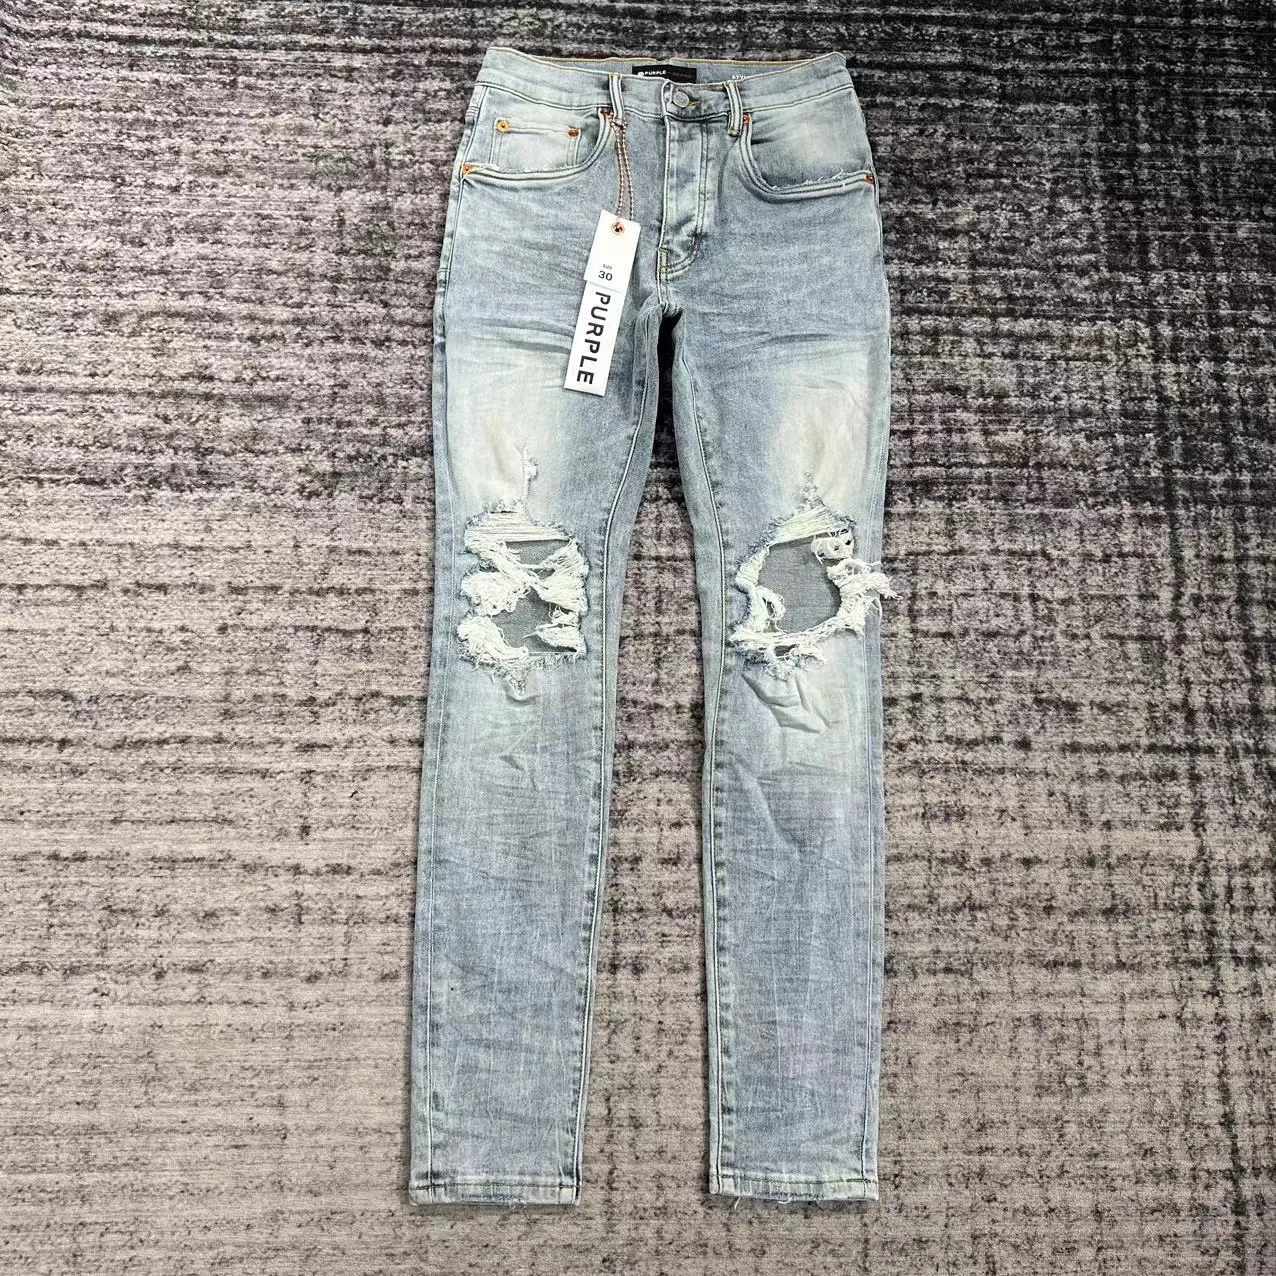 Purple Designer Distressed Jeans Men With Ripped Straight Straps, Genuine  Denim, Washed Old Long Style, Fashionable Hole Stack Size 11 From  Fashionclothing321, $56.96